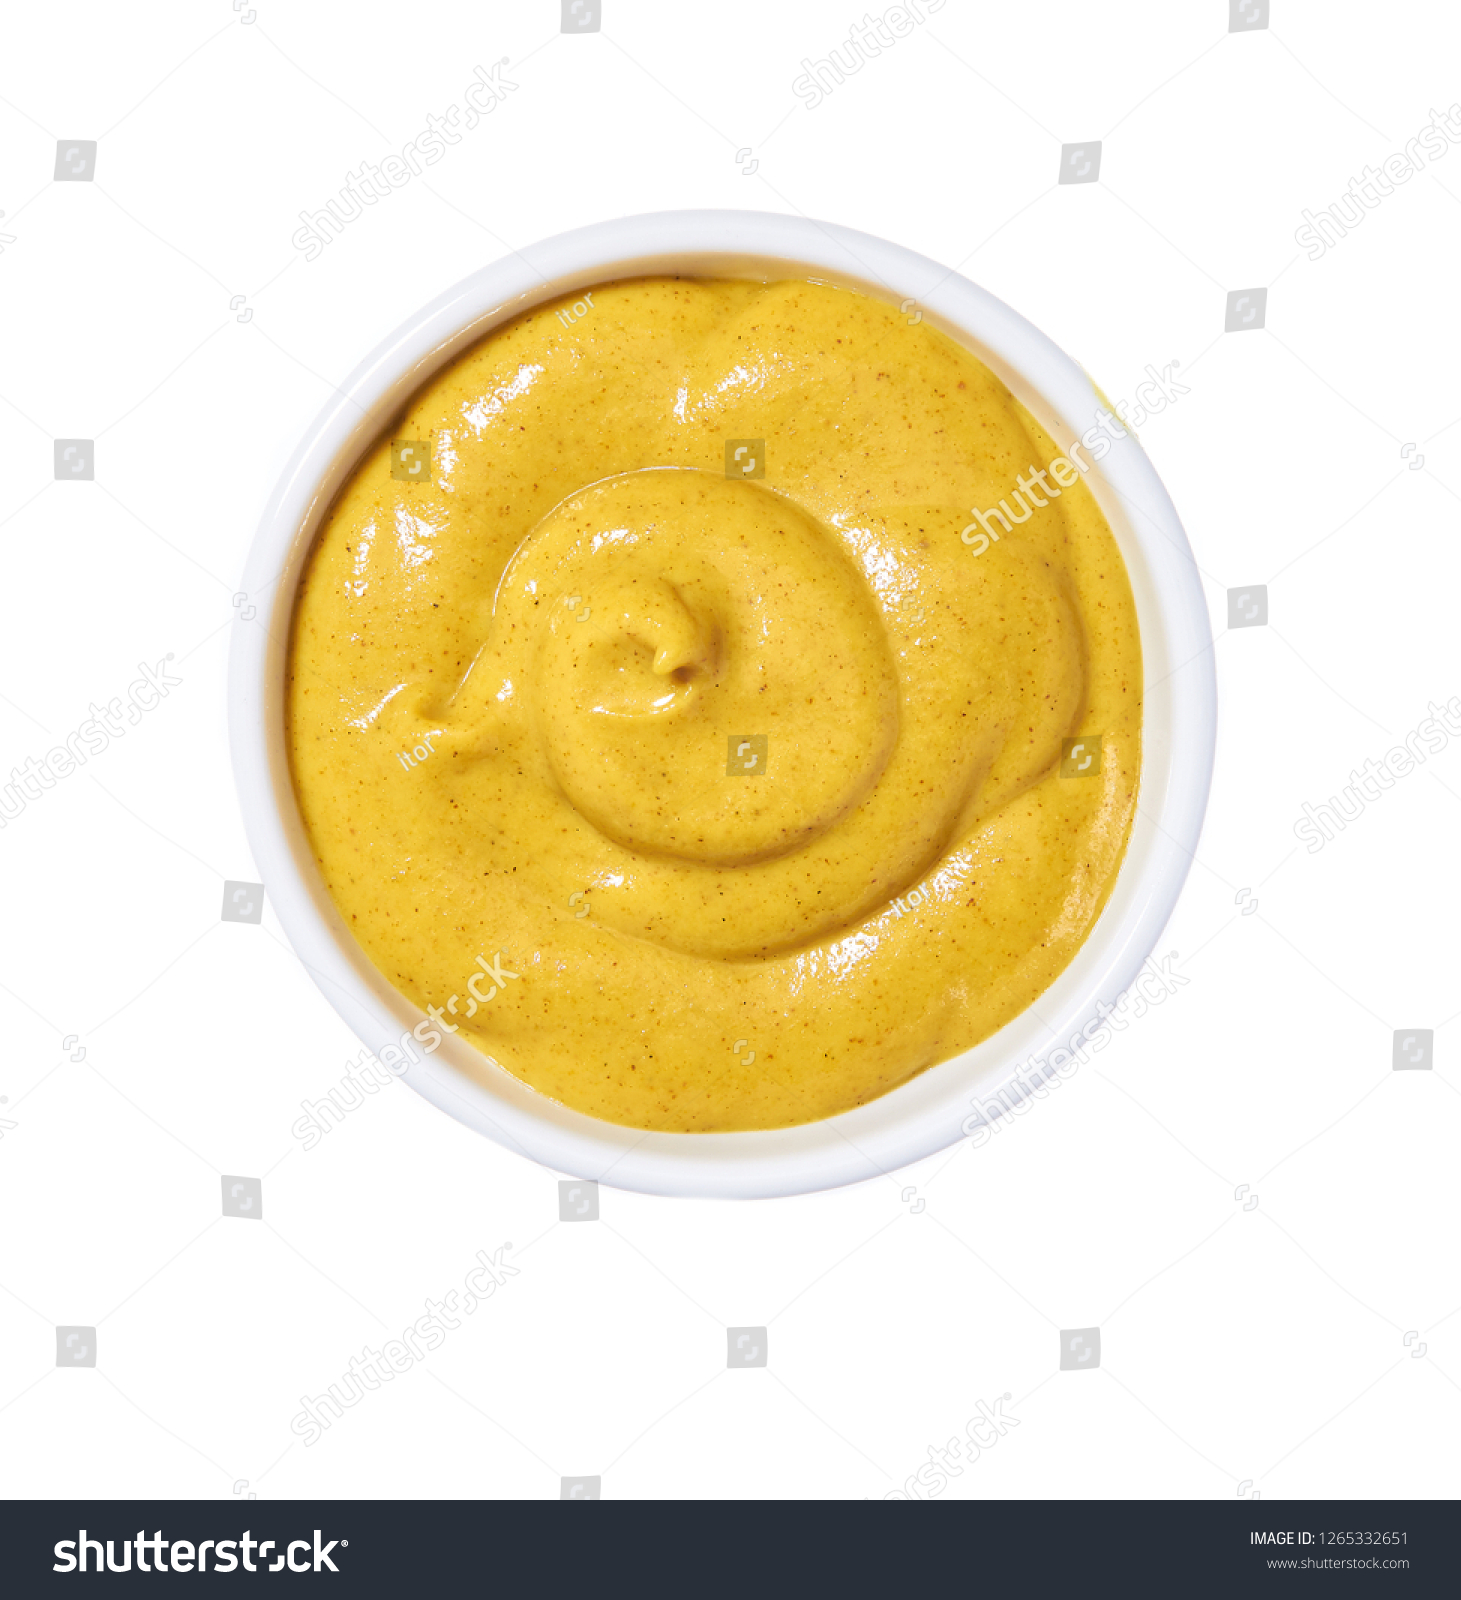 Mustard sauce in ceramic bowl isolated on white background. Portion of mustard sauce. #1265332651